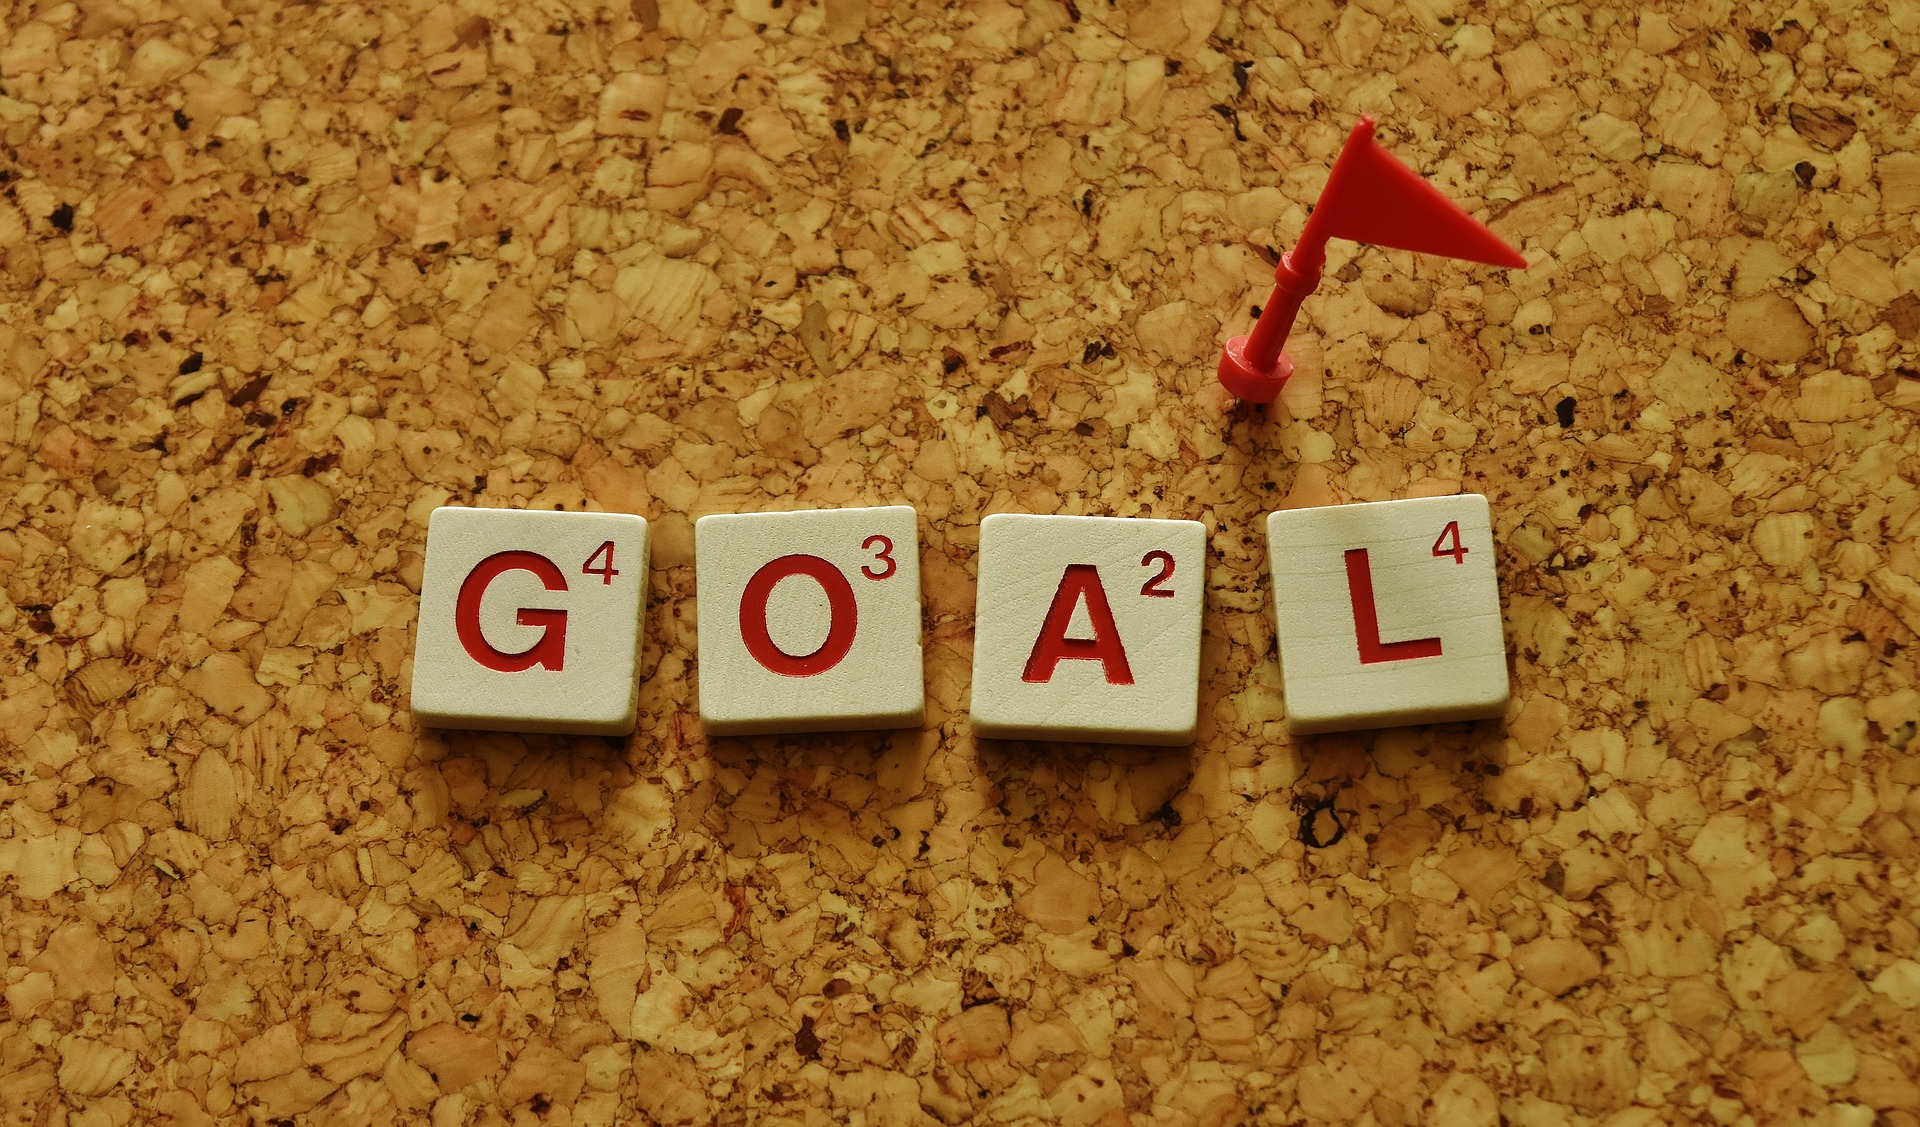 How important is having a goal?